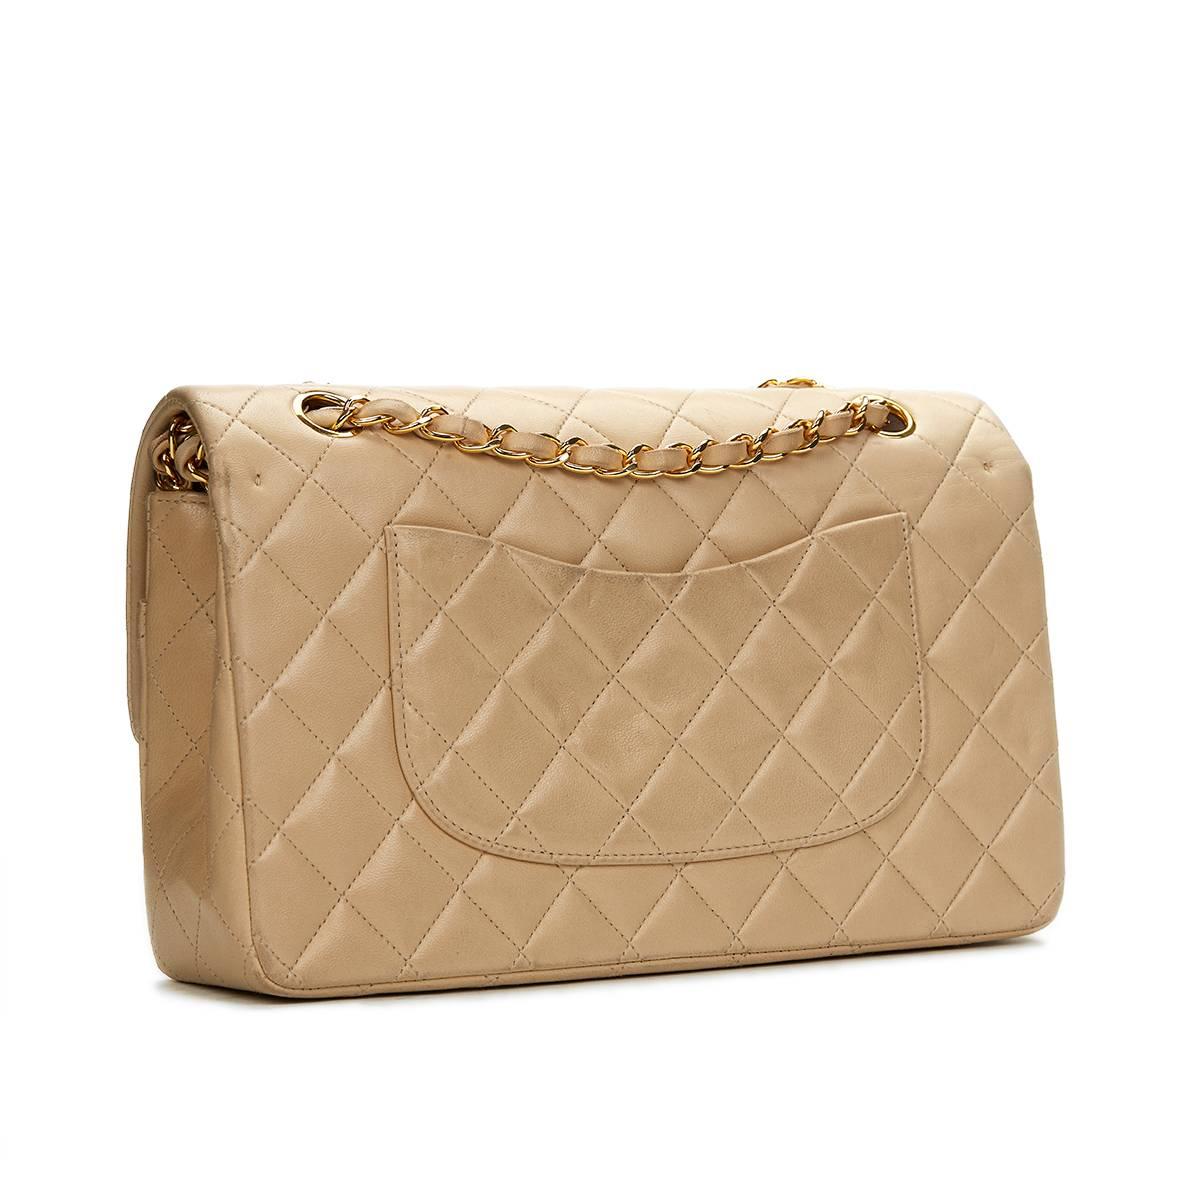 1990s Chanel Beige Quilted Lambskin Vintage Medium Classic Double Flap Bag 2